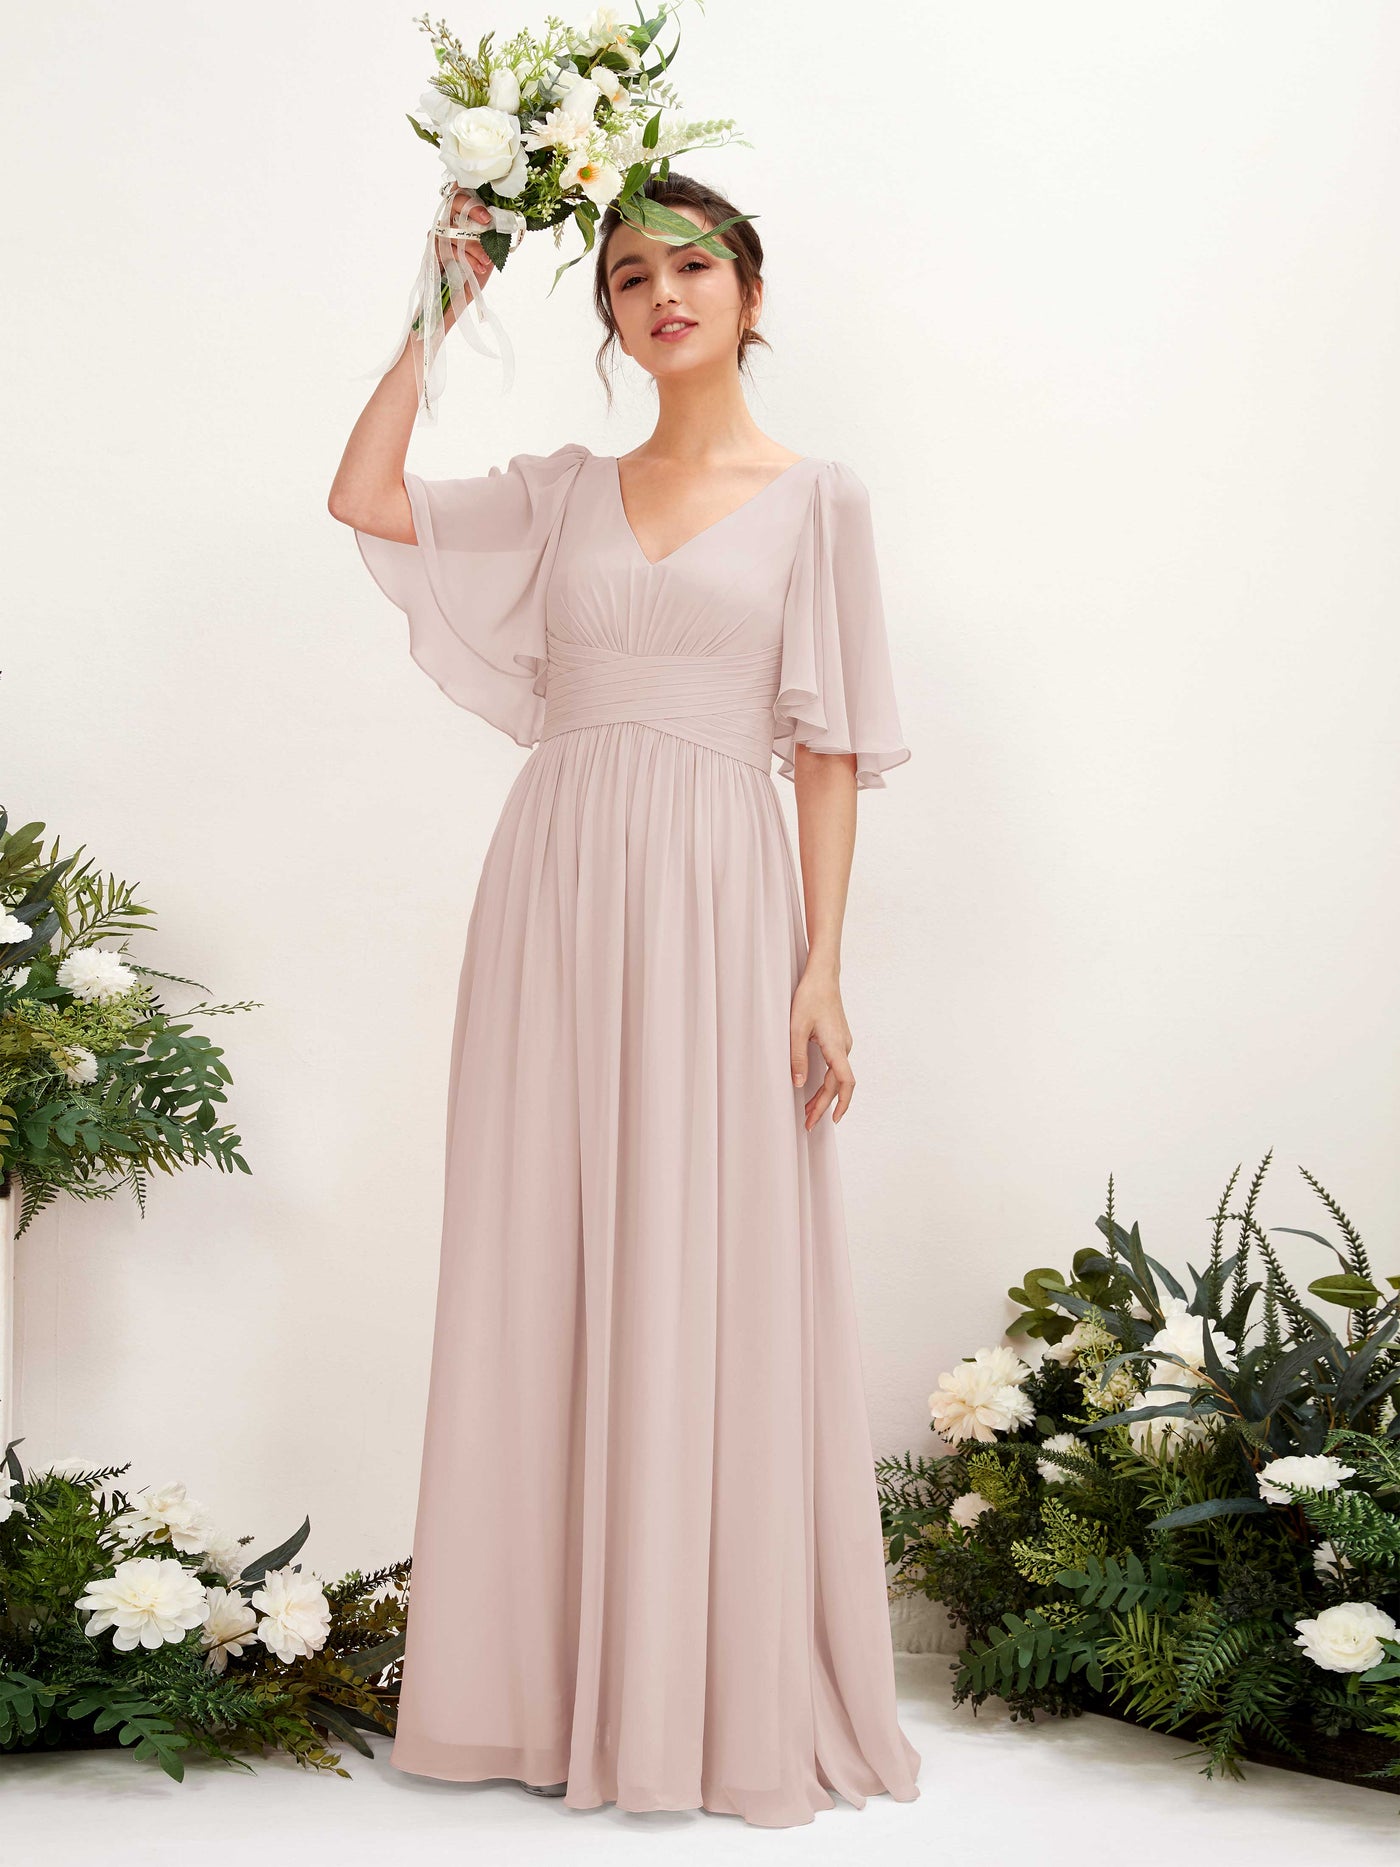 Biscotti Bridesmaid Dresses Bridesmaid Dress A-line Chiffon V-neck Full Length 1/2 Sleeves Wedding Party Dress (81221635)#color_biscotti